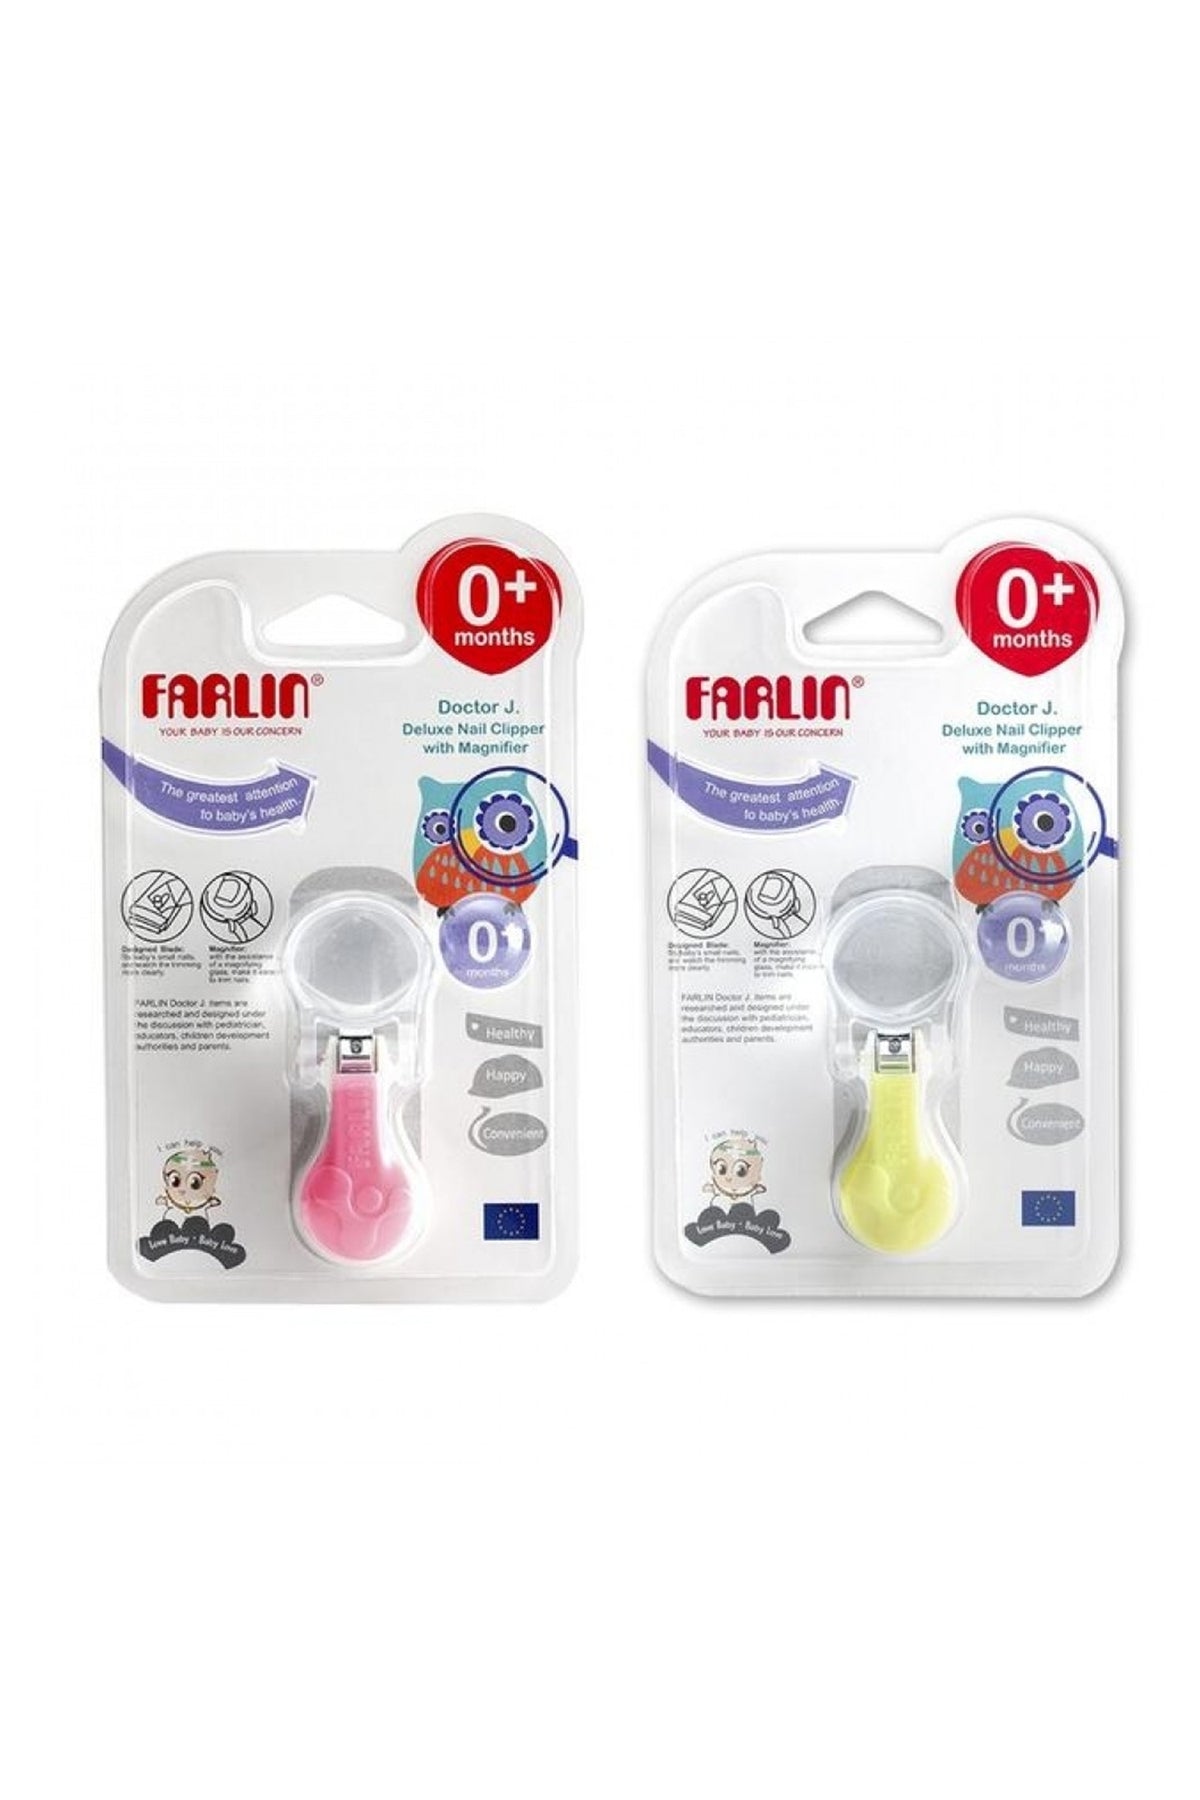 Farlin Deluxe Nail Clipper With Magnifier